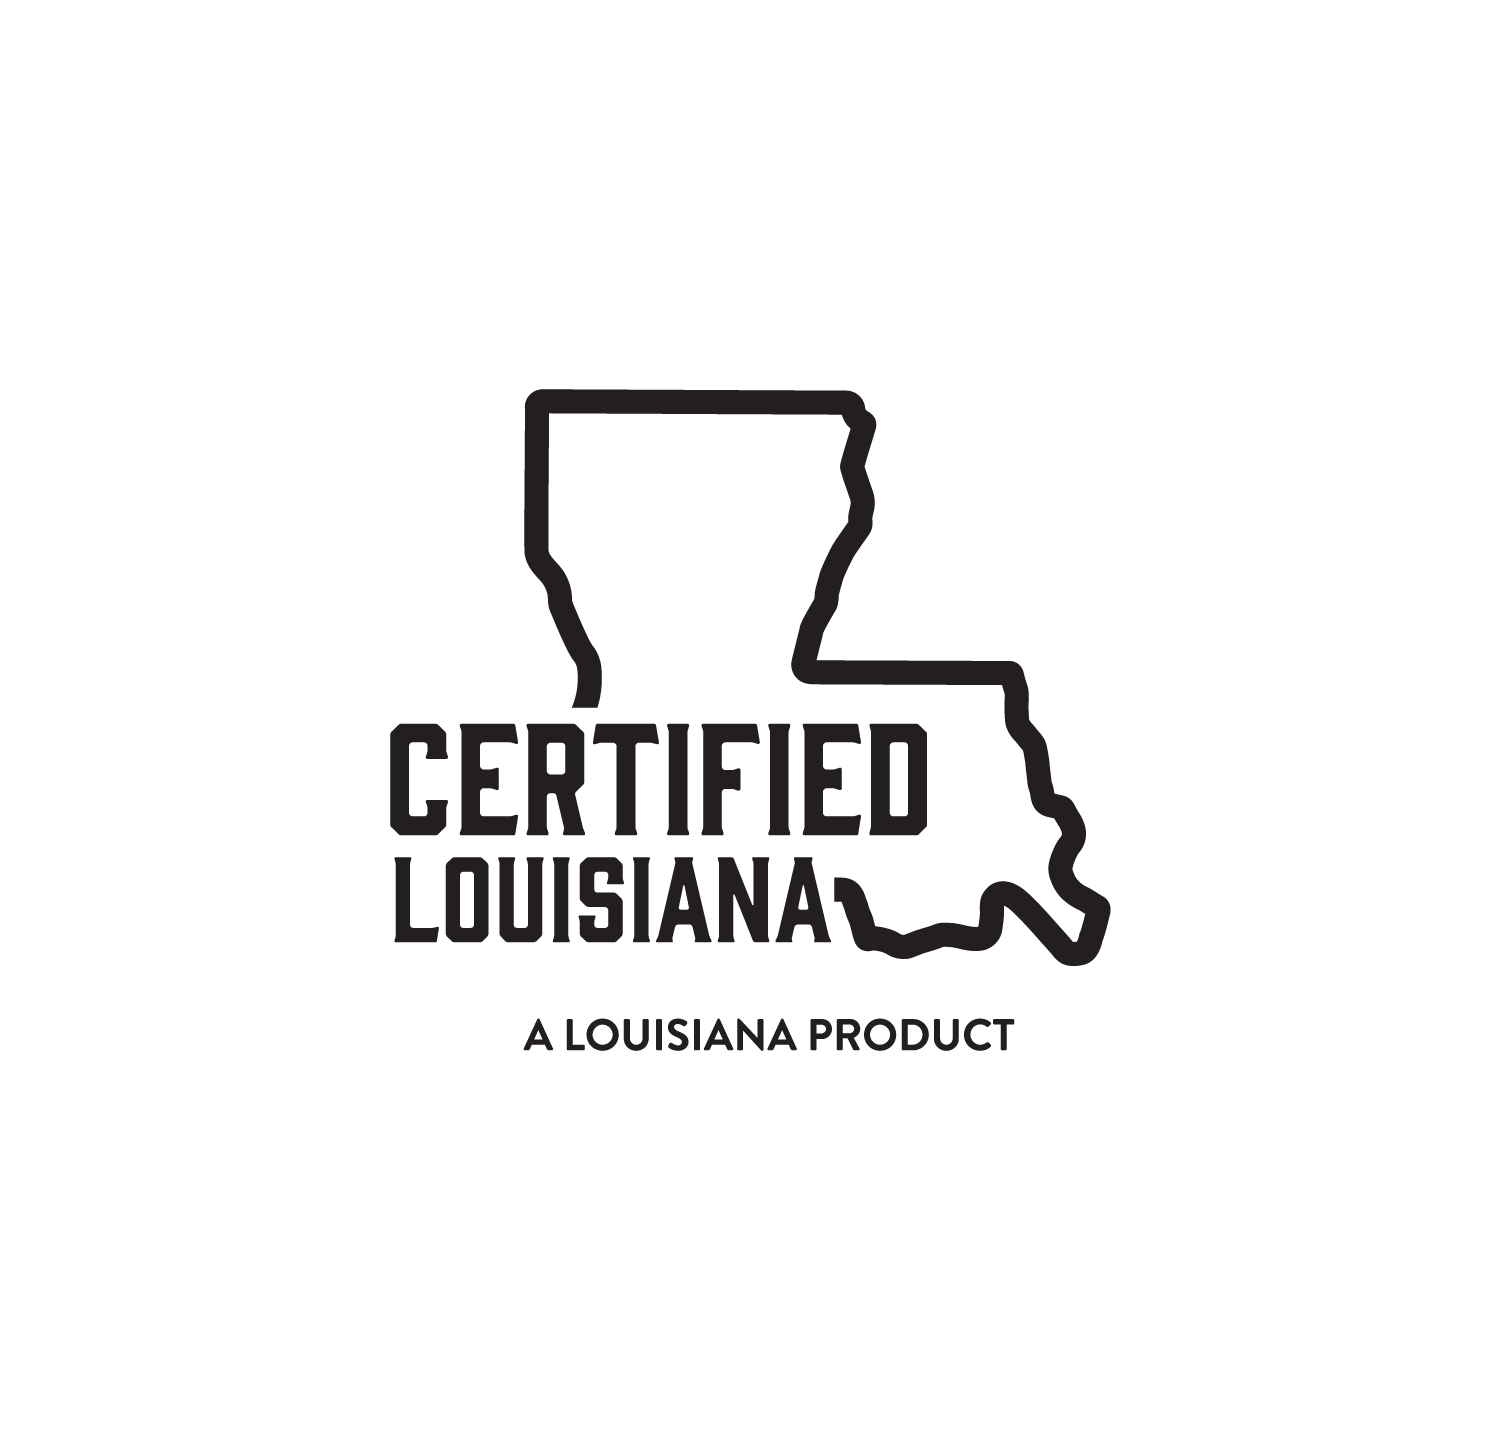 Lousiana Logo - Agriculture dept. rolls out new 'Certified Louisiana' logos